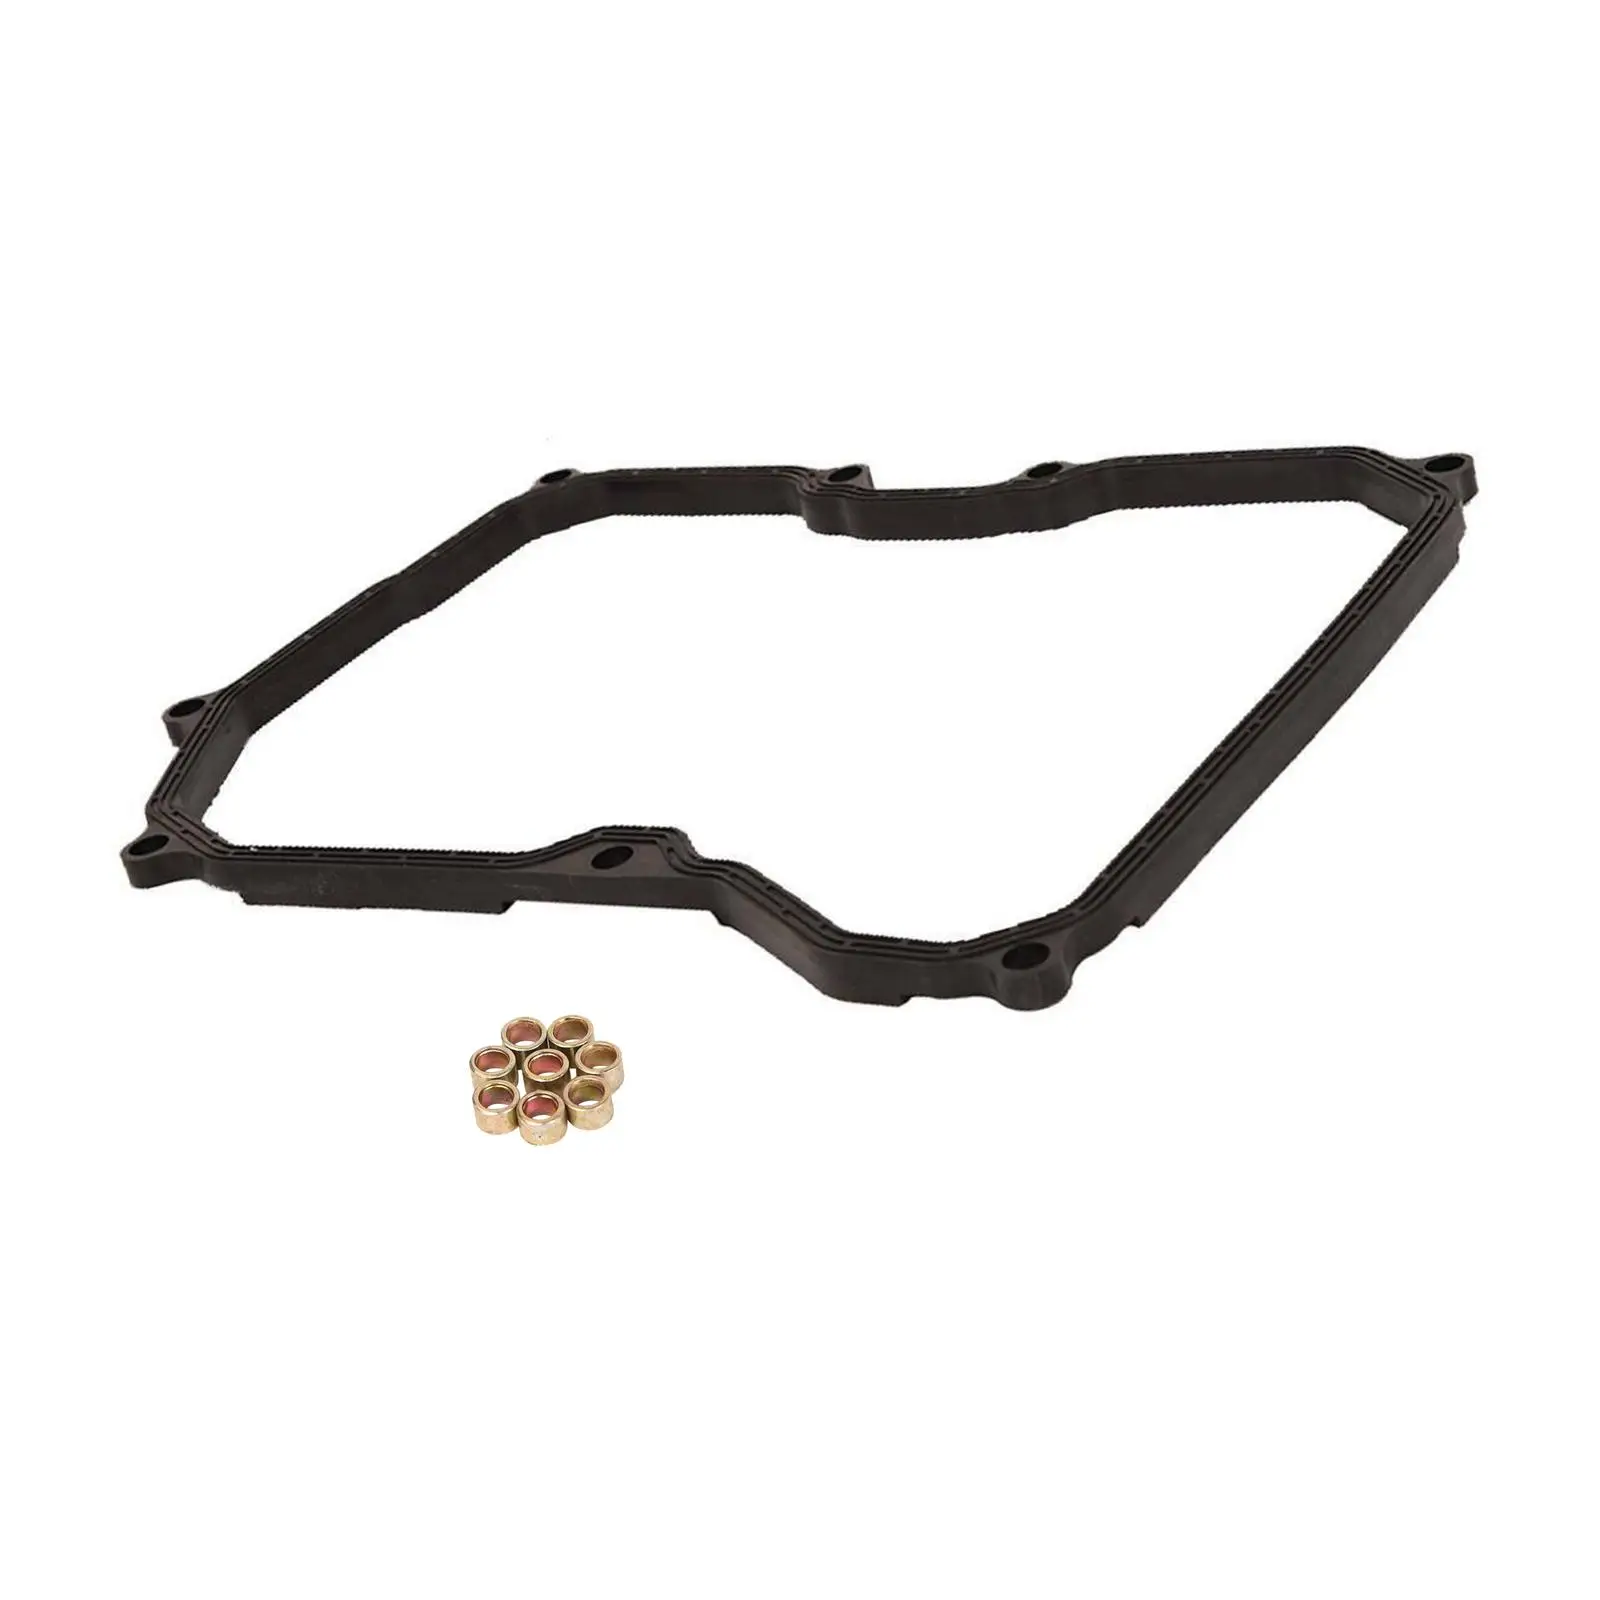 Transmission Pan Gasket, Lightweight Durable, 24117566356, Fit for Mini Parts